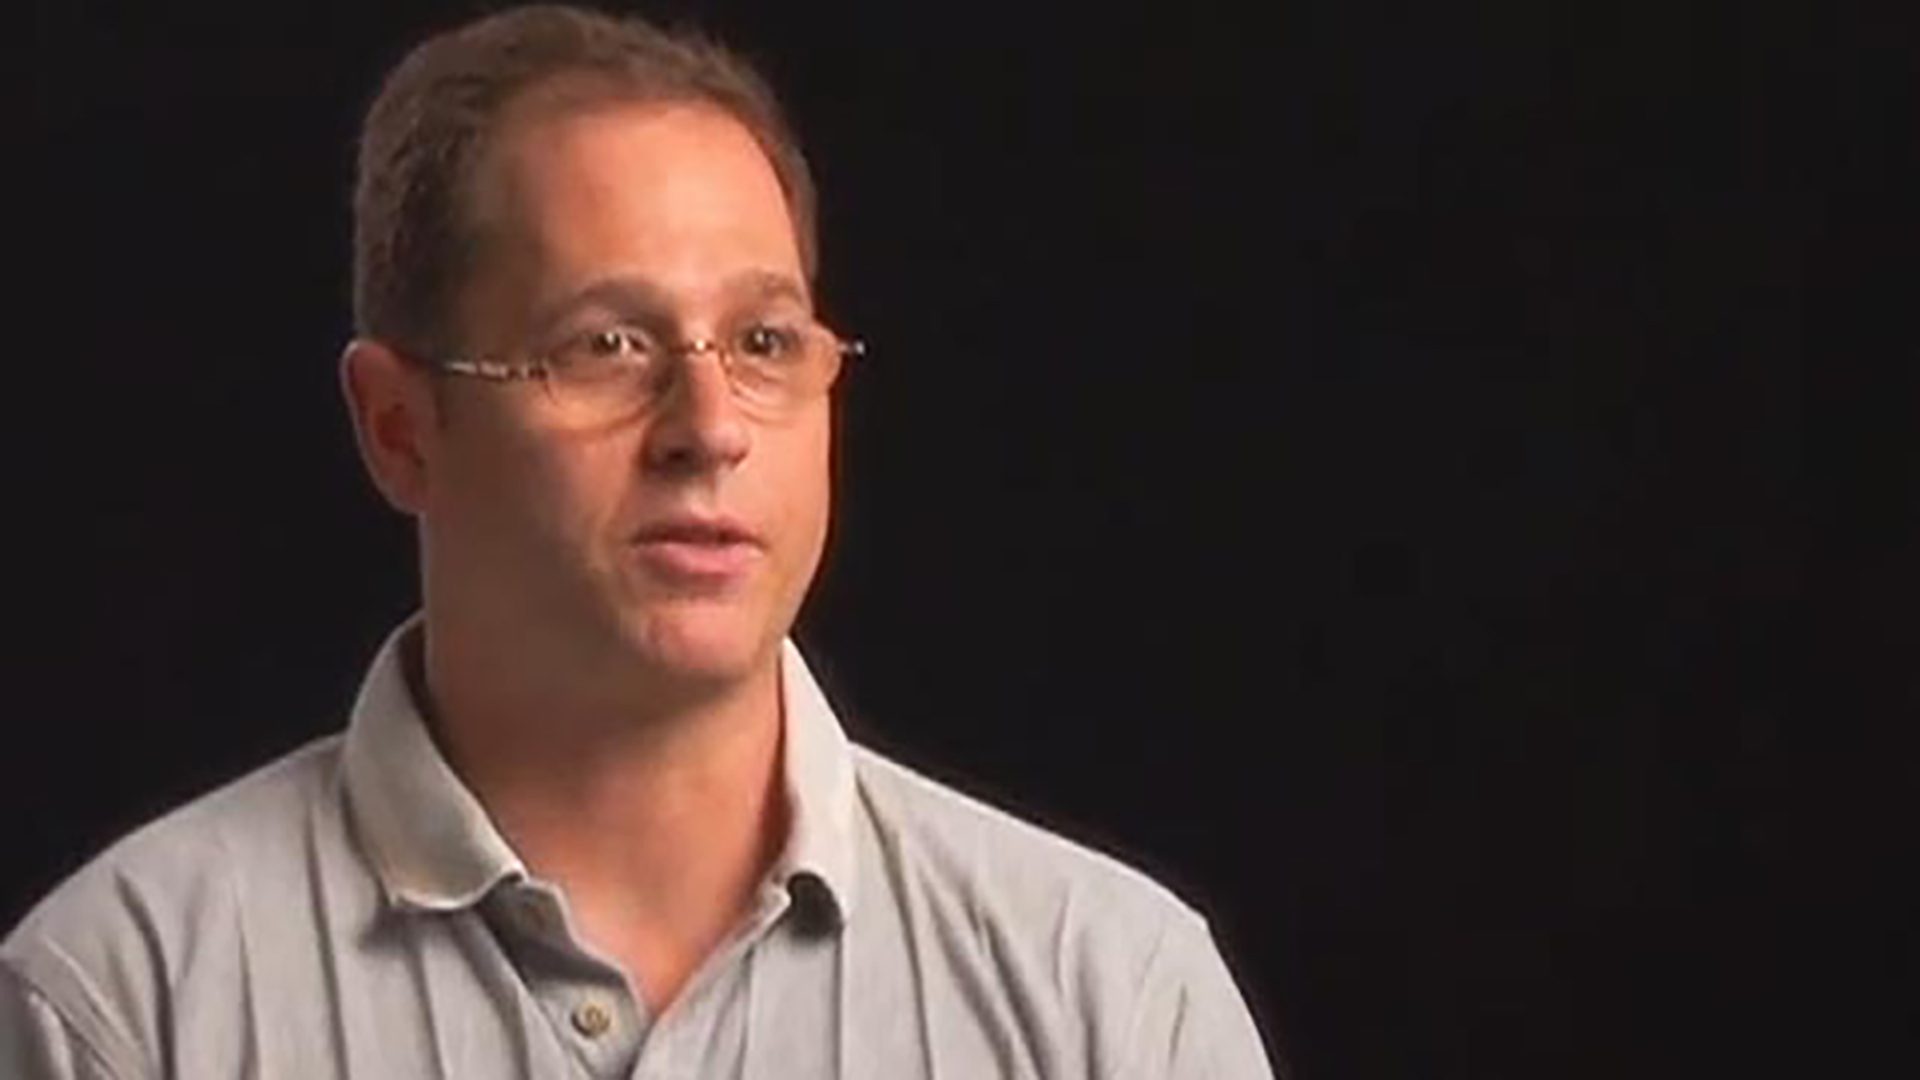 An adult man wearing glasses and a gray polo shirt is interviewed against a black background.